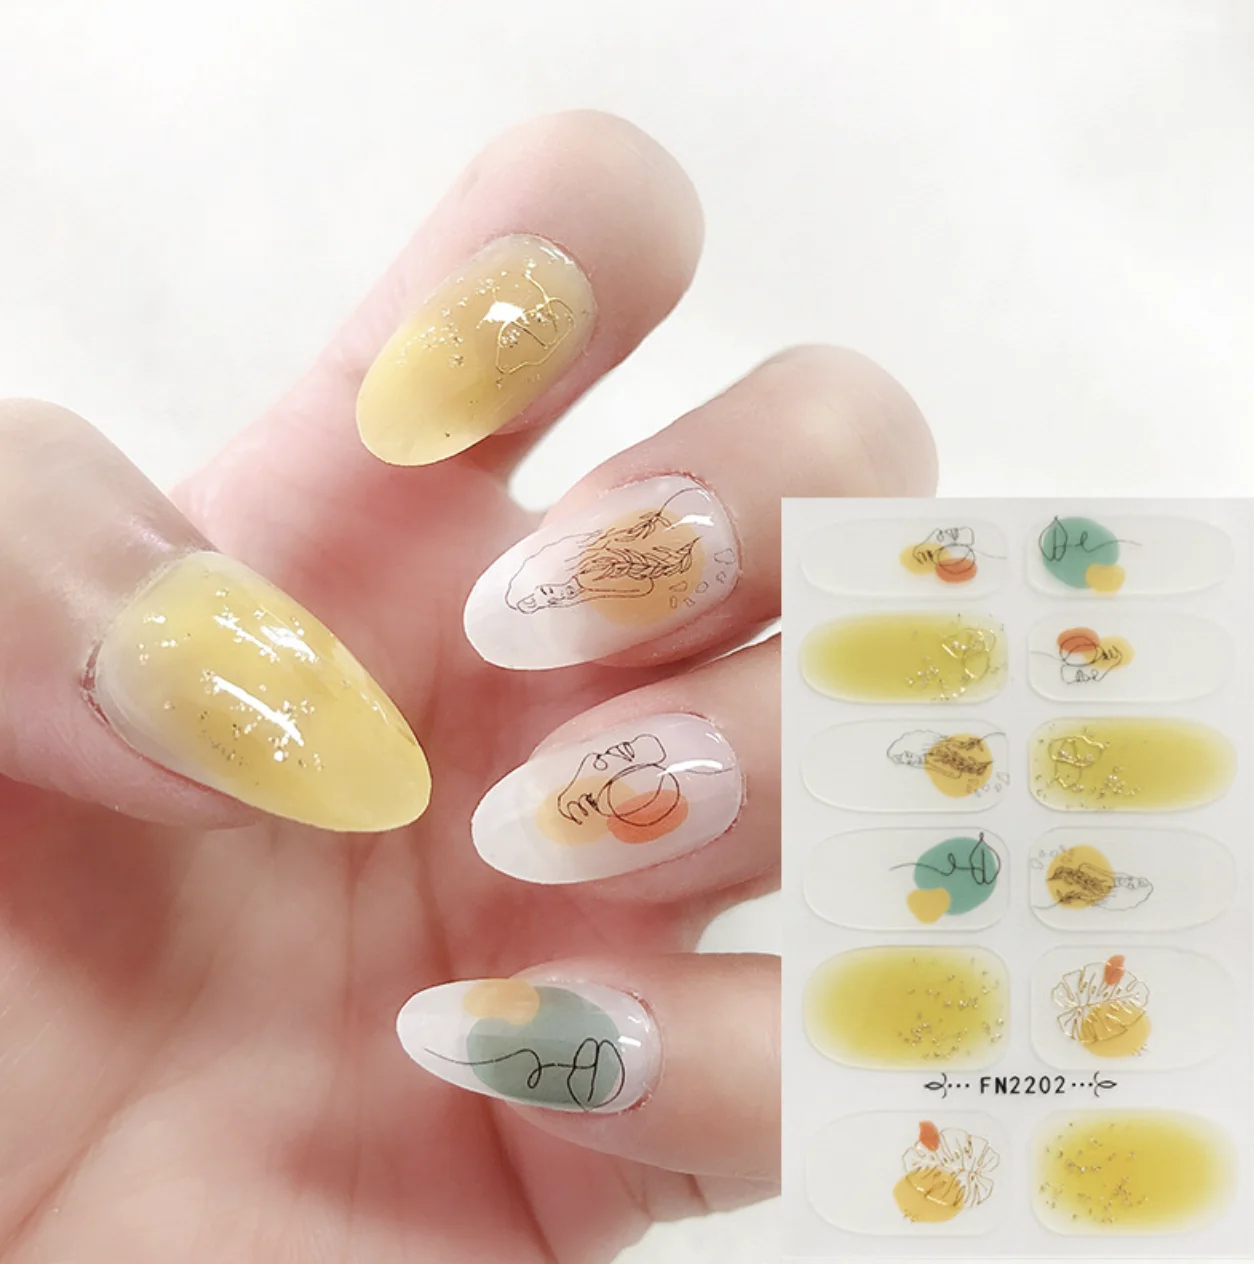 3D Cute press On Nails Stickers for Nails Nails Parts Nail Art Decorations Manicure Nails Art Full Cover Adhesive Stickers Set